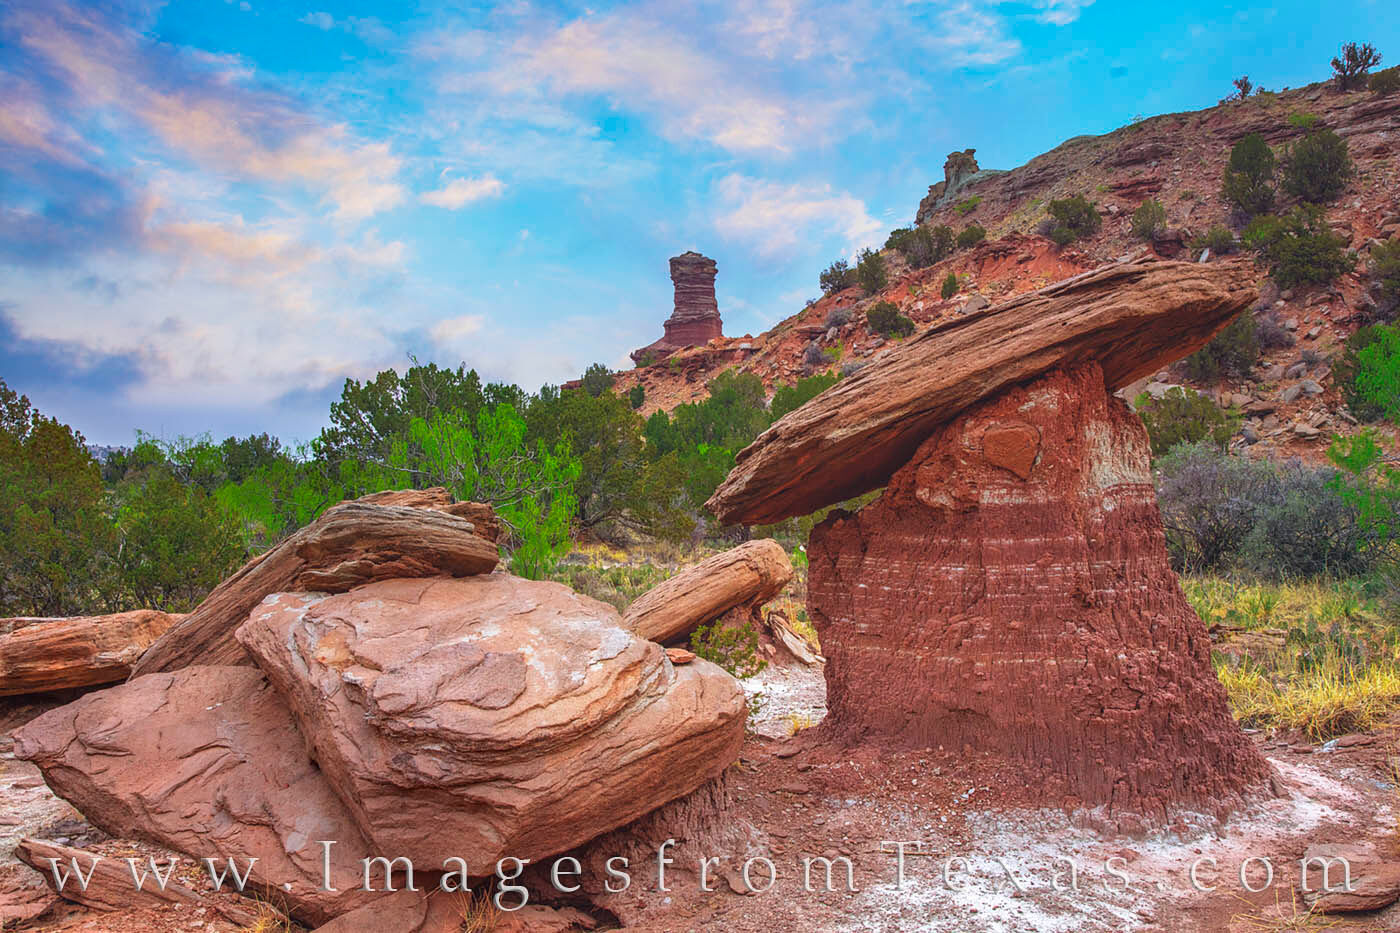 A unique view of the Lighthouse hoodoo in Palo Duro Canyon